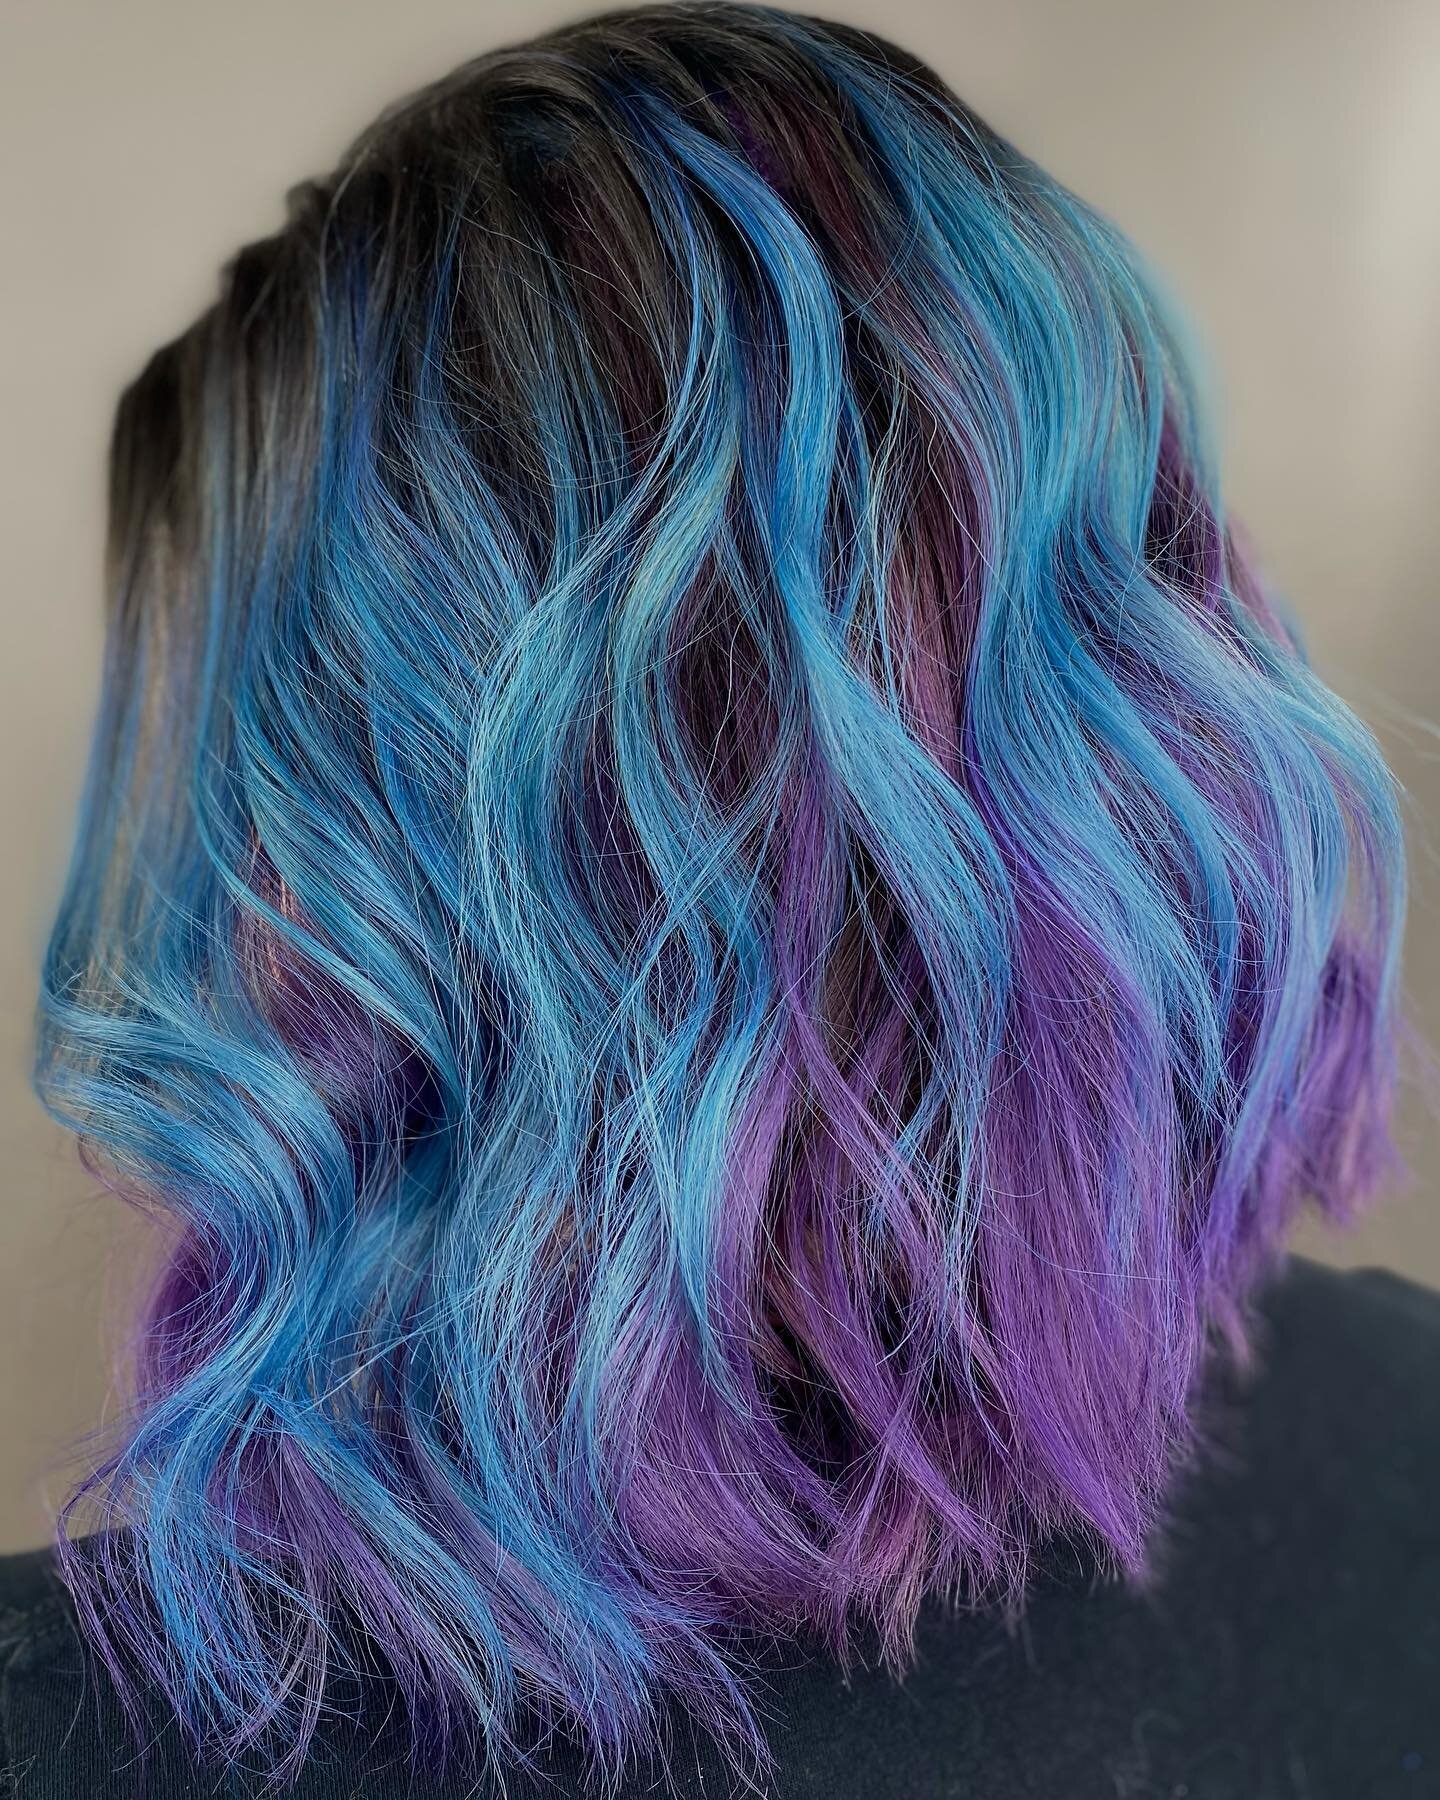 Unleashed a frosty masterpiece with enchanting blue and purple tones. ❄️💙💜 #WinterHairVibes